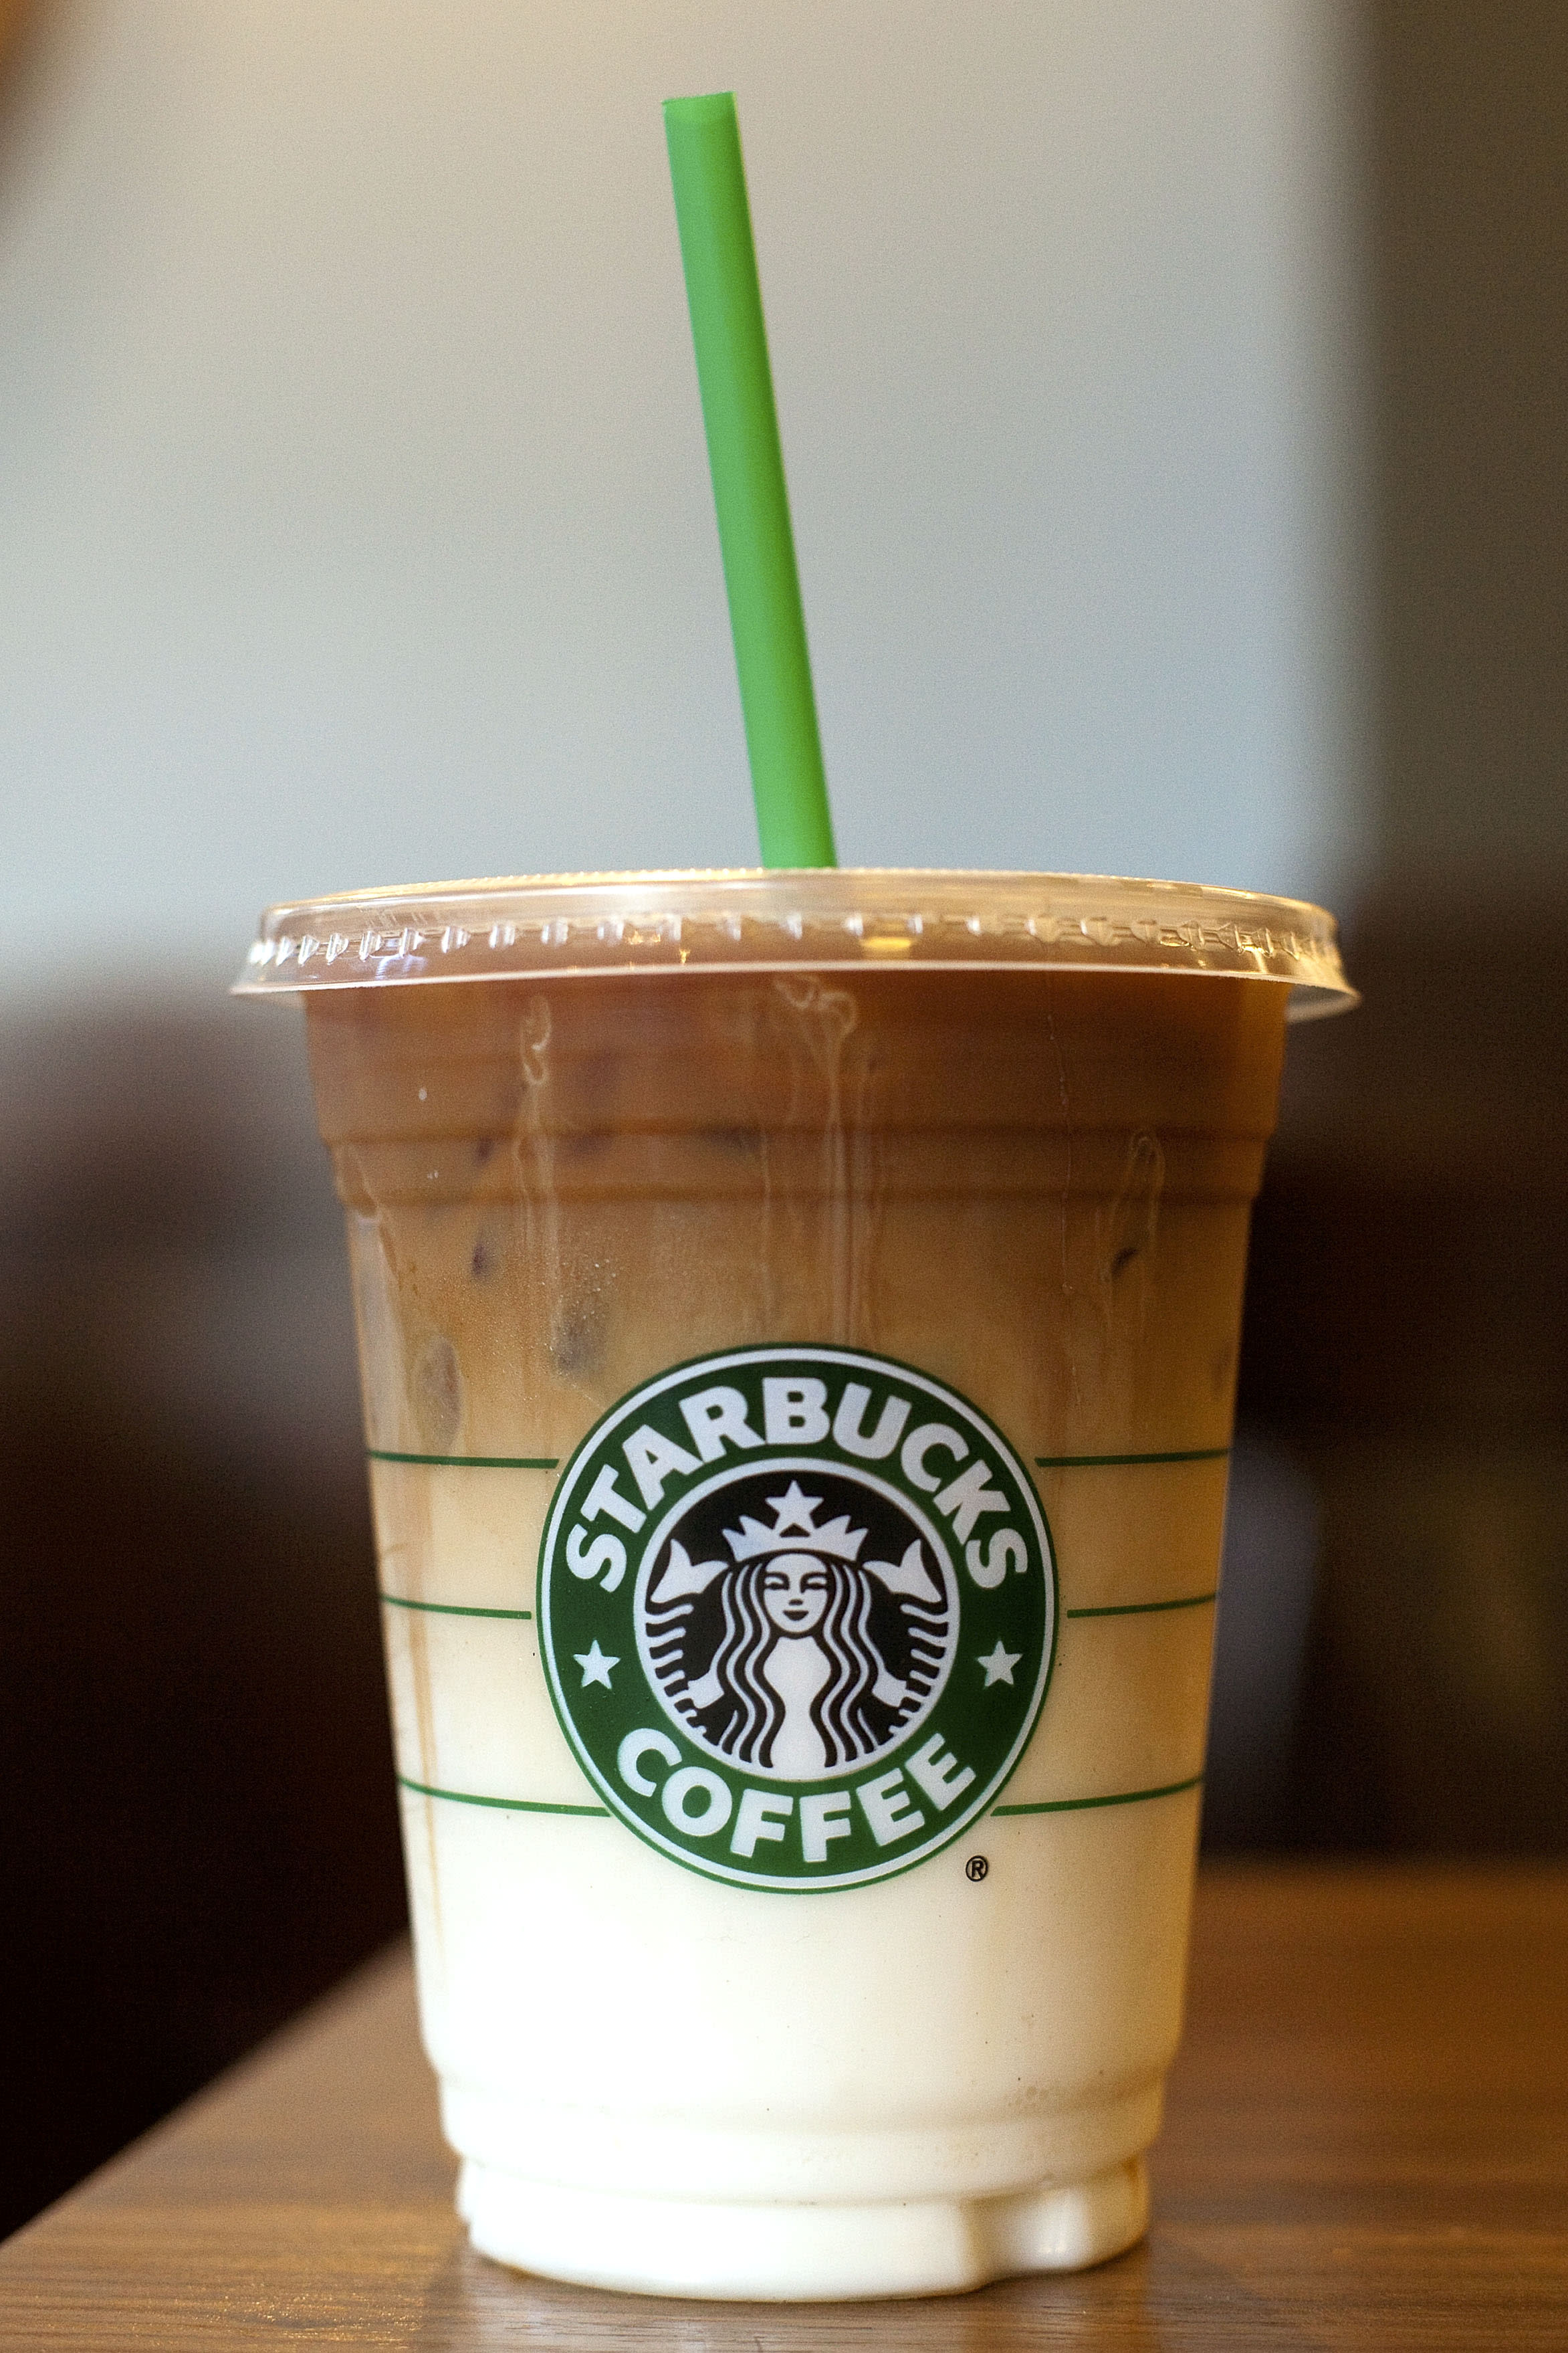 Iced coffee from starbucks